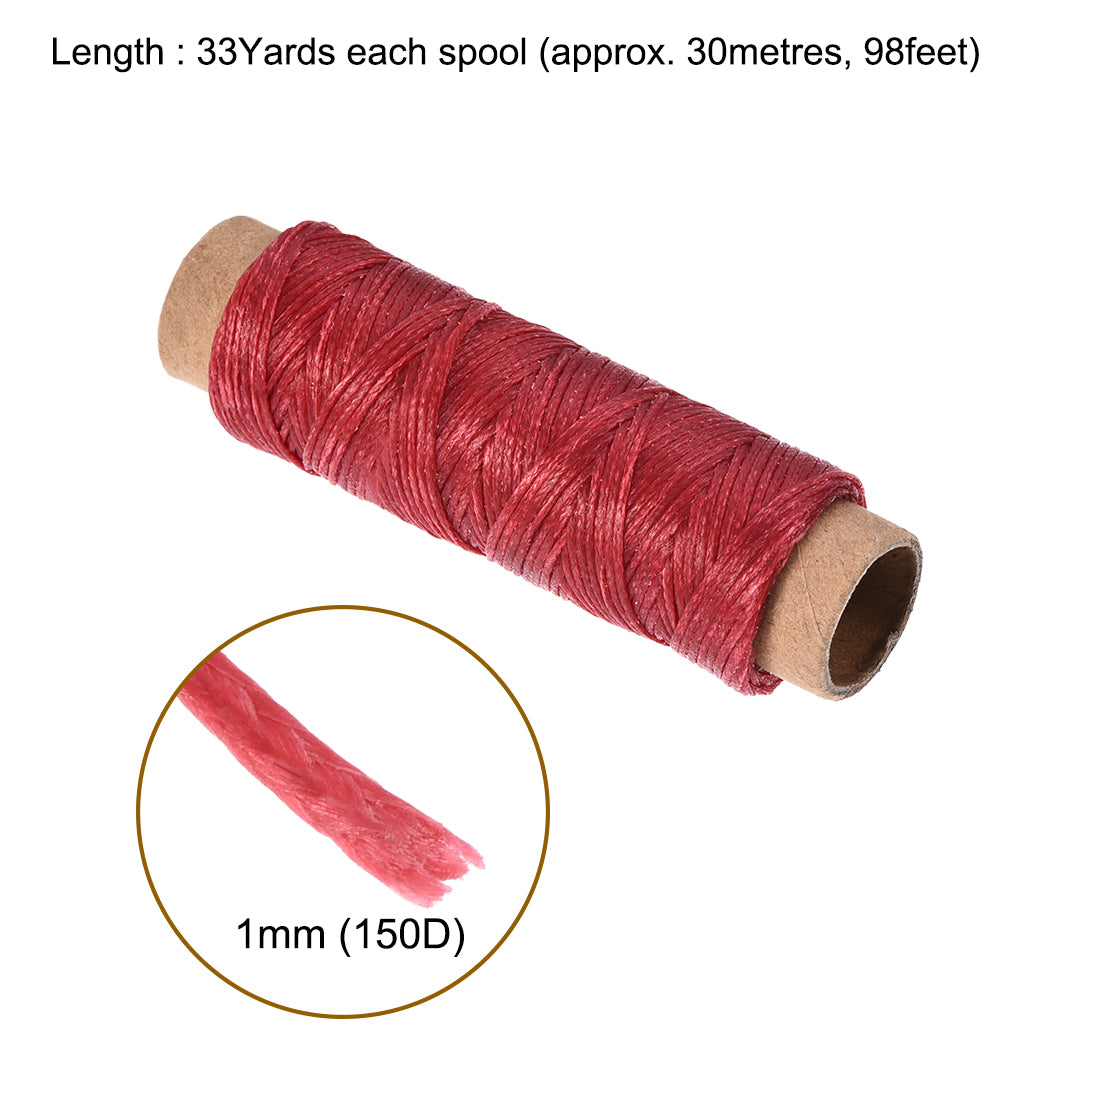 Uxcell Uxcell 2pcs Leather Sewing Thread 33 Yards 150D/1mm Waxed Flat Cord (Violet)